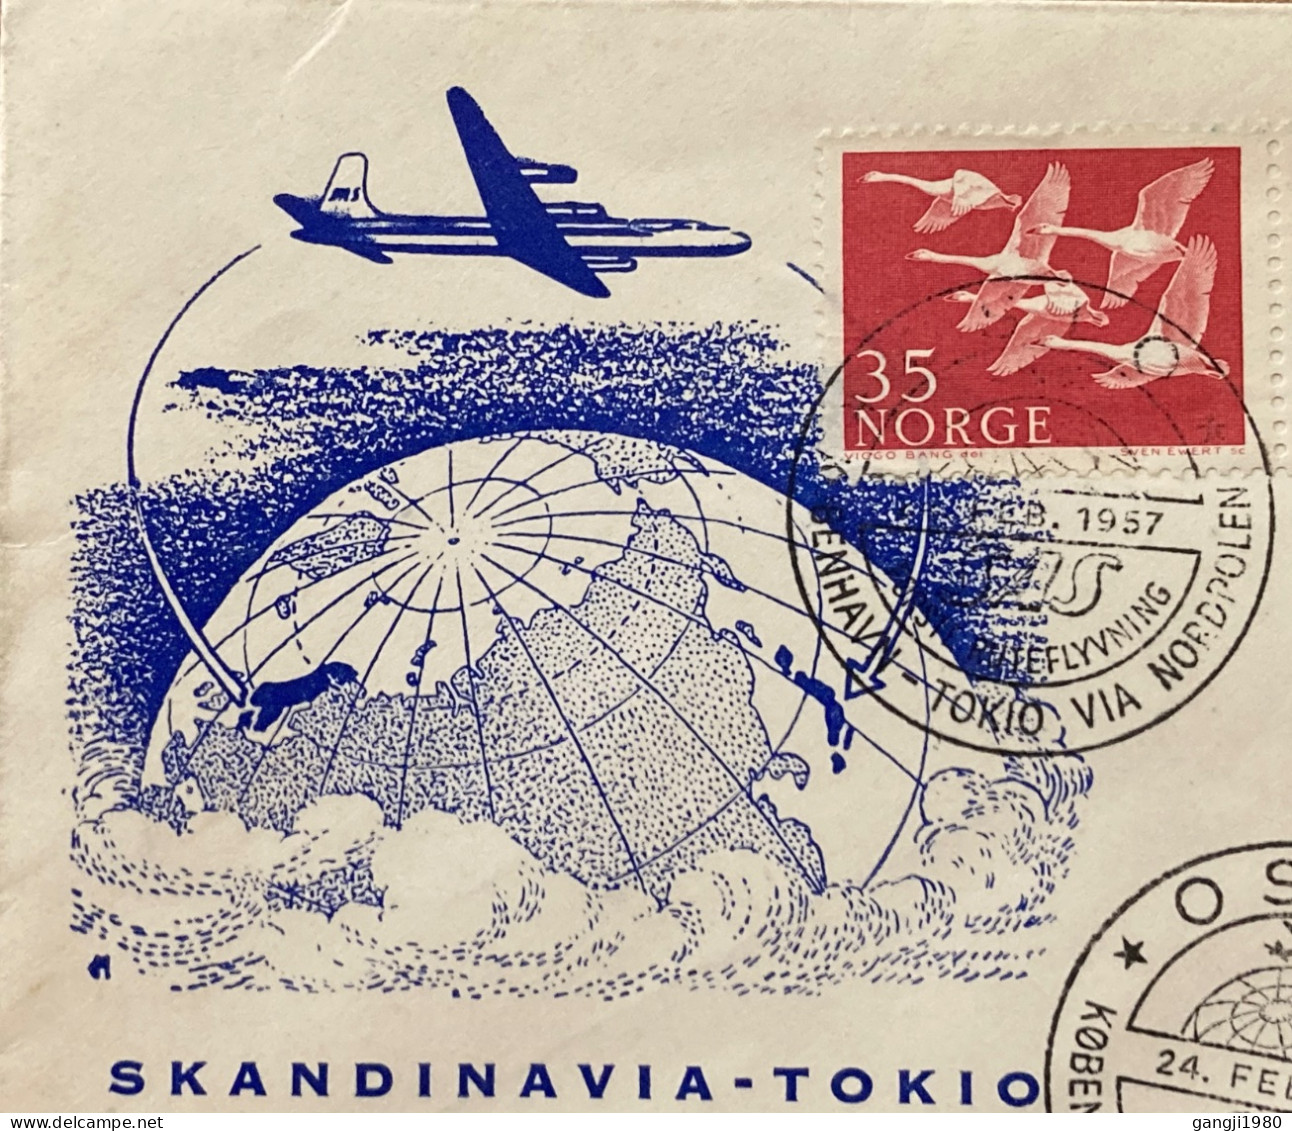 NORWAY 1957, FIRST FLIGHT COVER TO JAPAN, KOPEHAVEN -TO KYO VIA NORDPOLEN OSLO, TOKYO CITY CANCEL, ILLUSTRATE PLANE ON G - Lettres & Documents